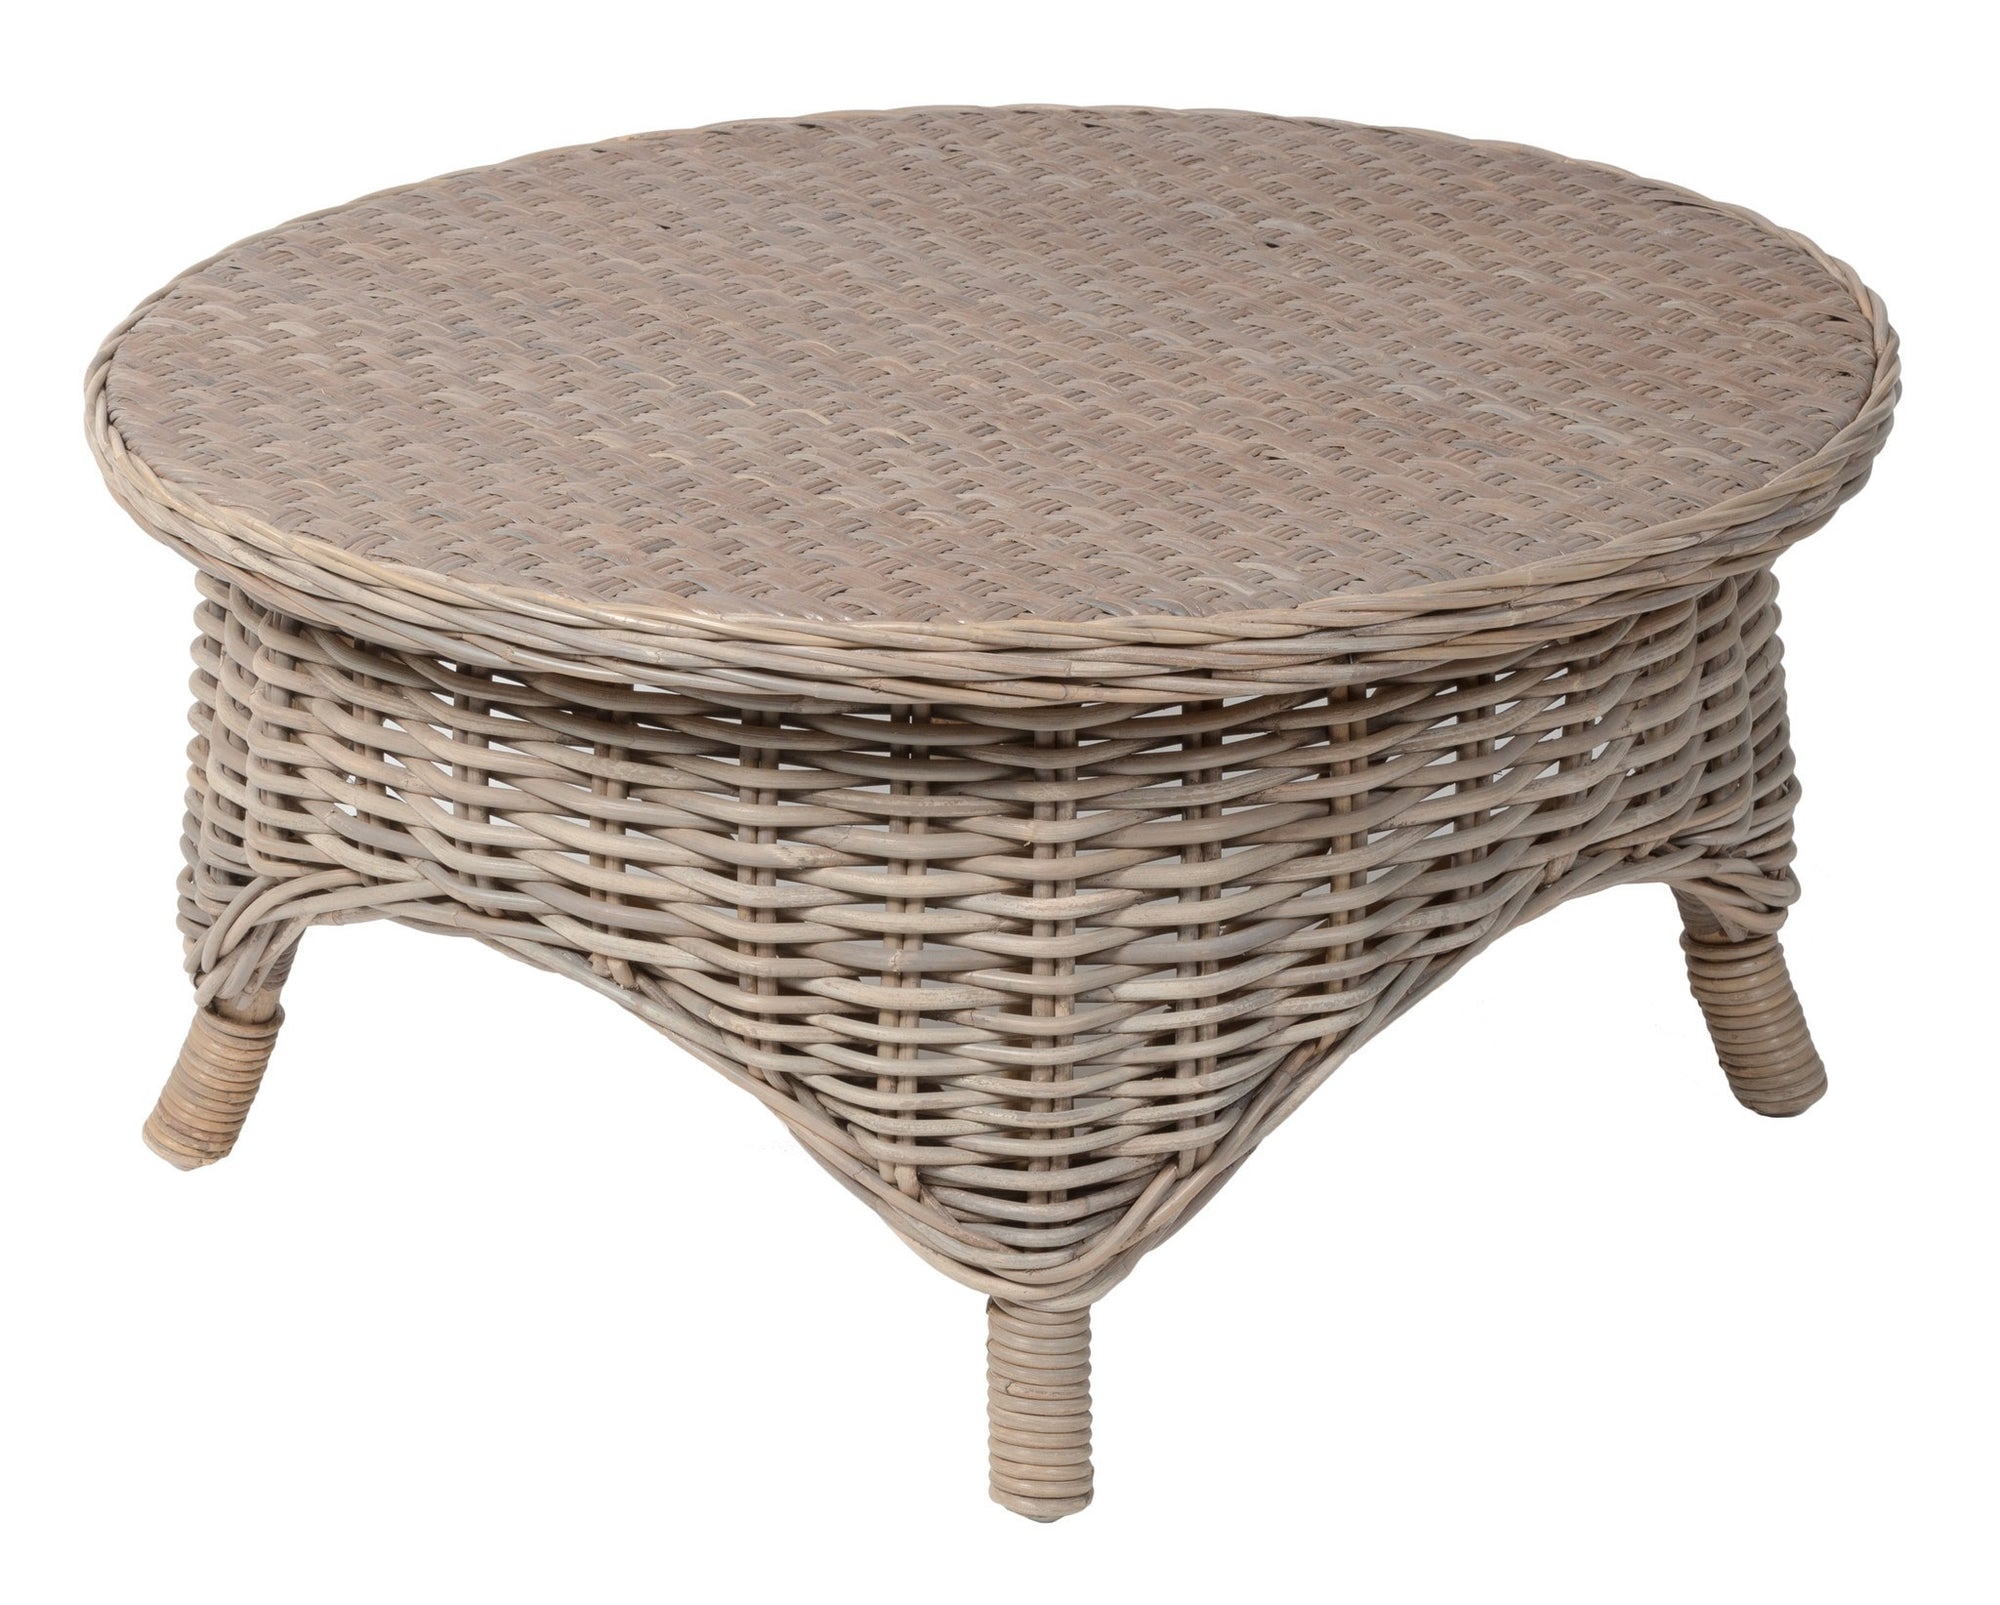 Designer Wicker & Rattan By Tribor Conservatory Coffee Table Coffee Table - Rattan Imports